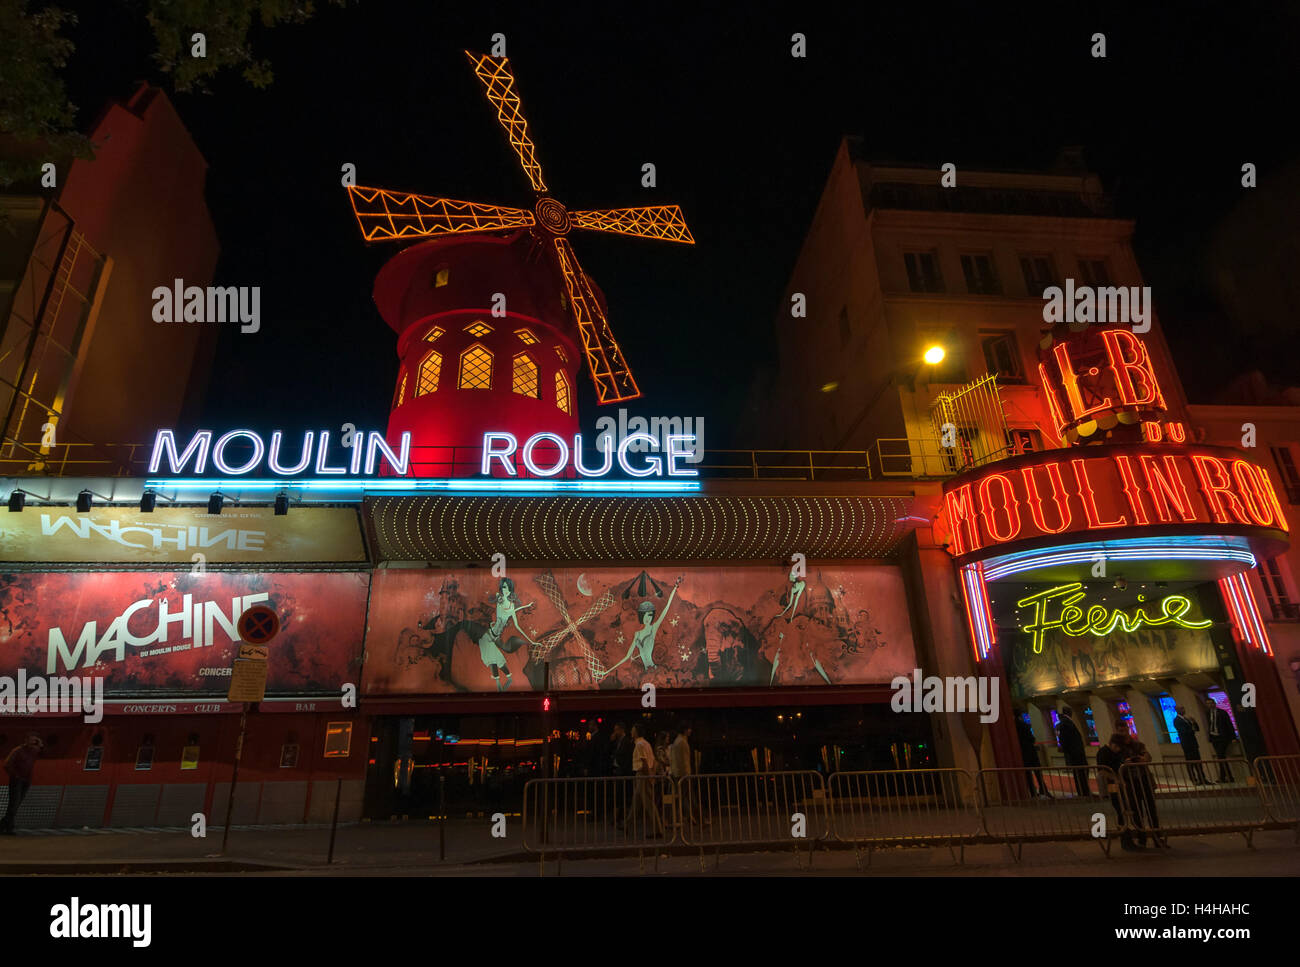 PARIS - SEPT 16, 2014: The Moulin Rouge at night. Moulin Rouge or French for Red Mill is a famous cabaret and theater. Stock Photo